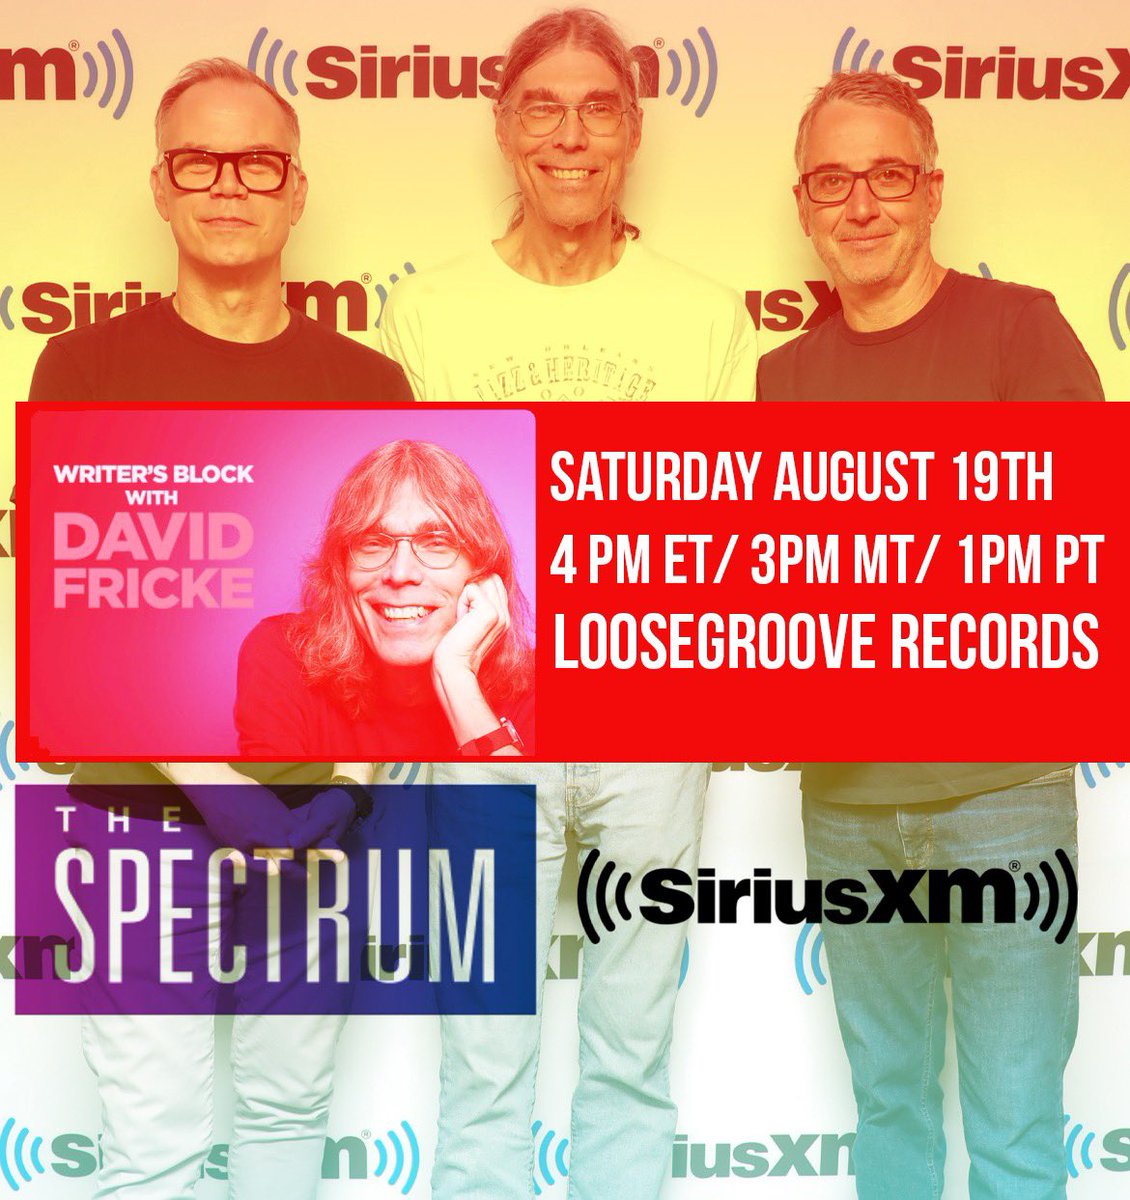 Stone and Regan chat Writer’s Block with David Fricke! Tune into SiriusXM SPECTRUM tomm 8/19 at 4ET. Episode also available on-demand now on the SXM app siriusxm.com/channels/the-s… @SXMSpectrum